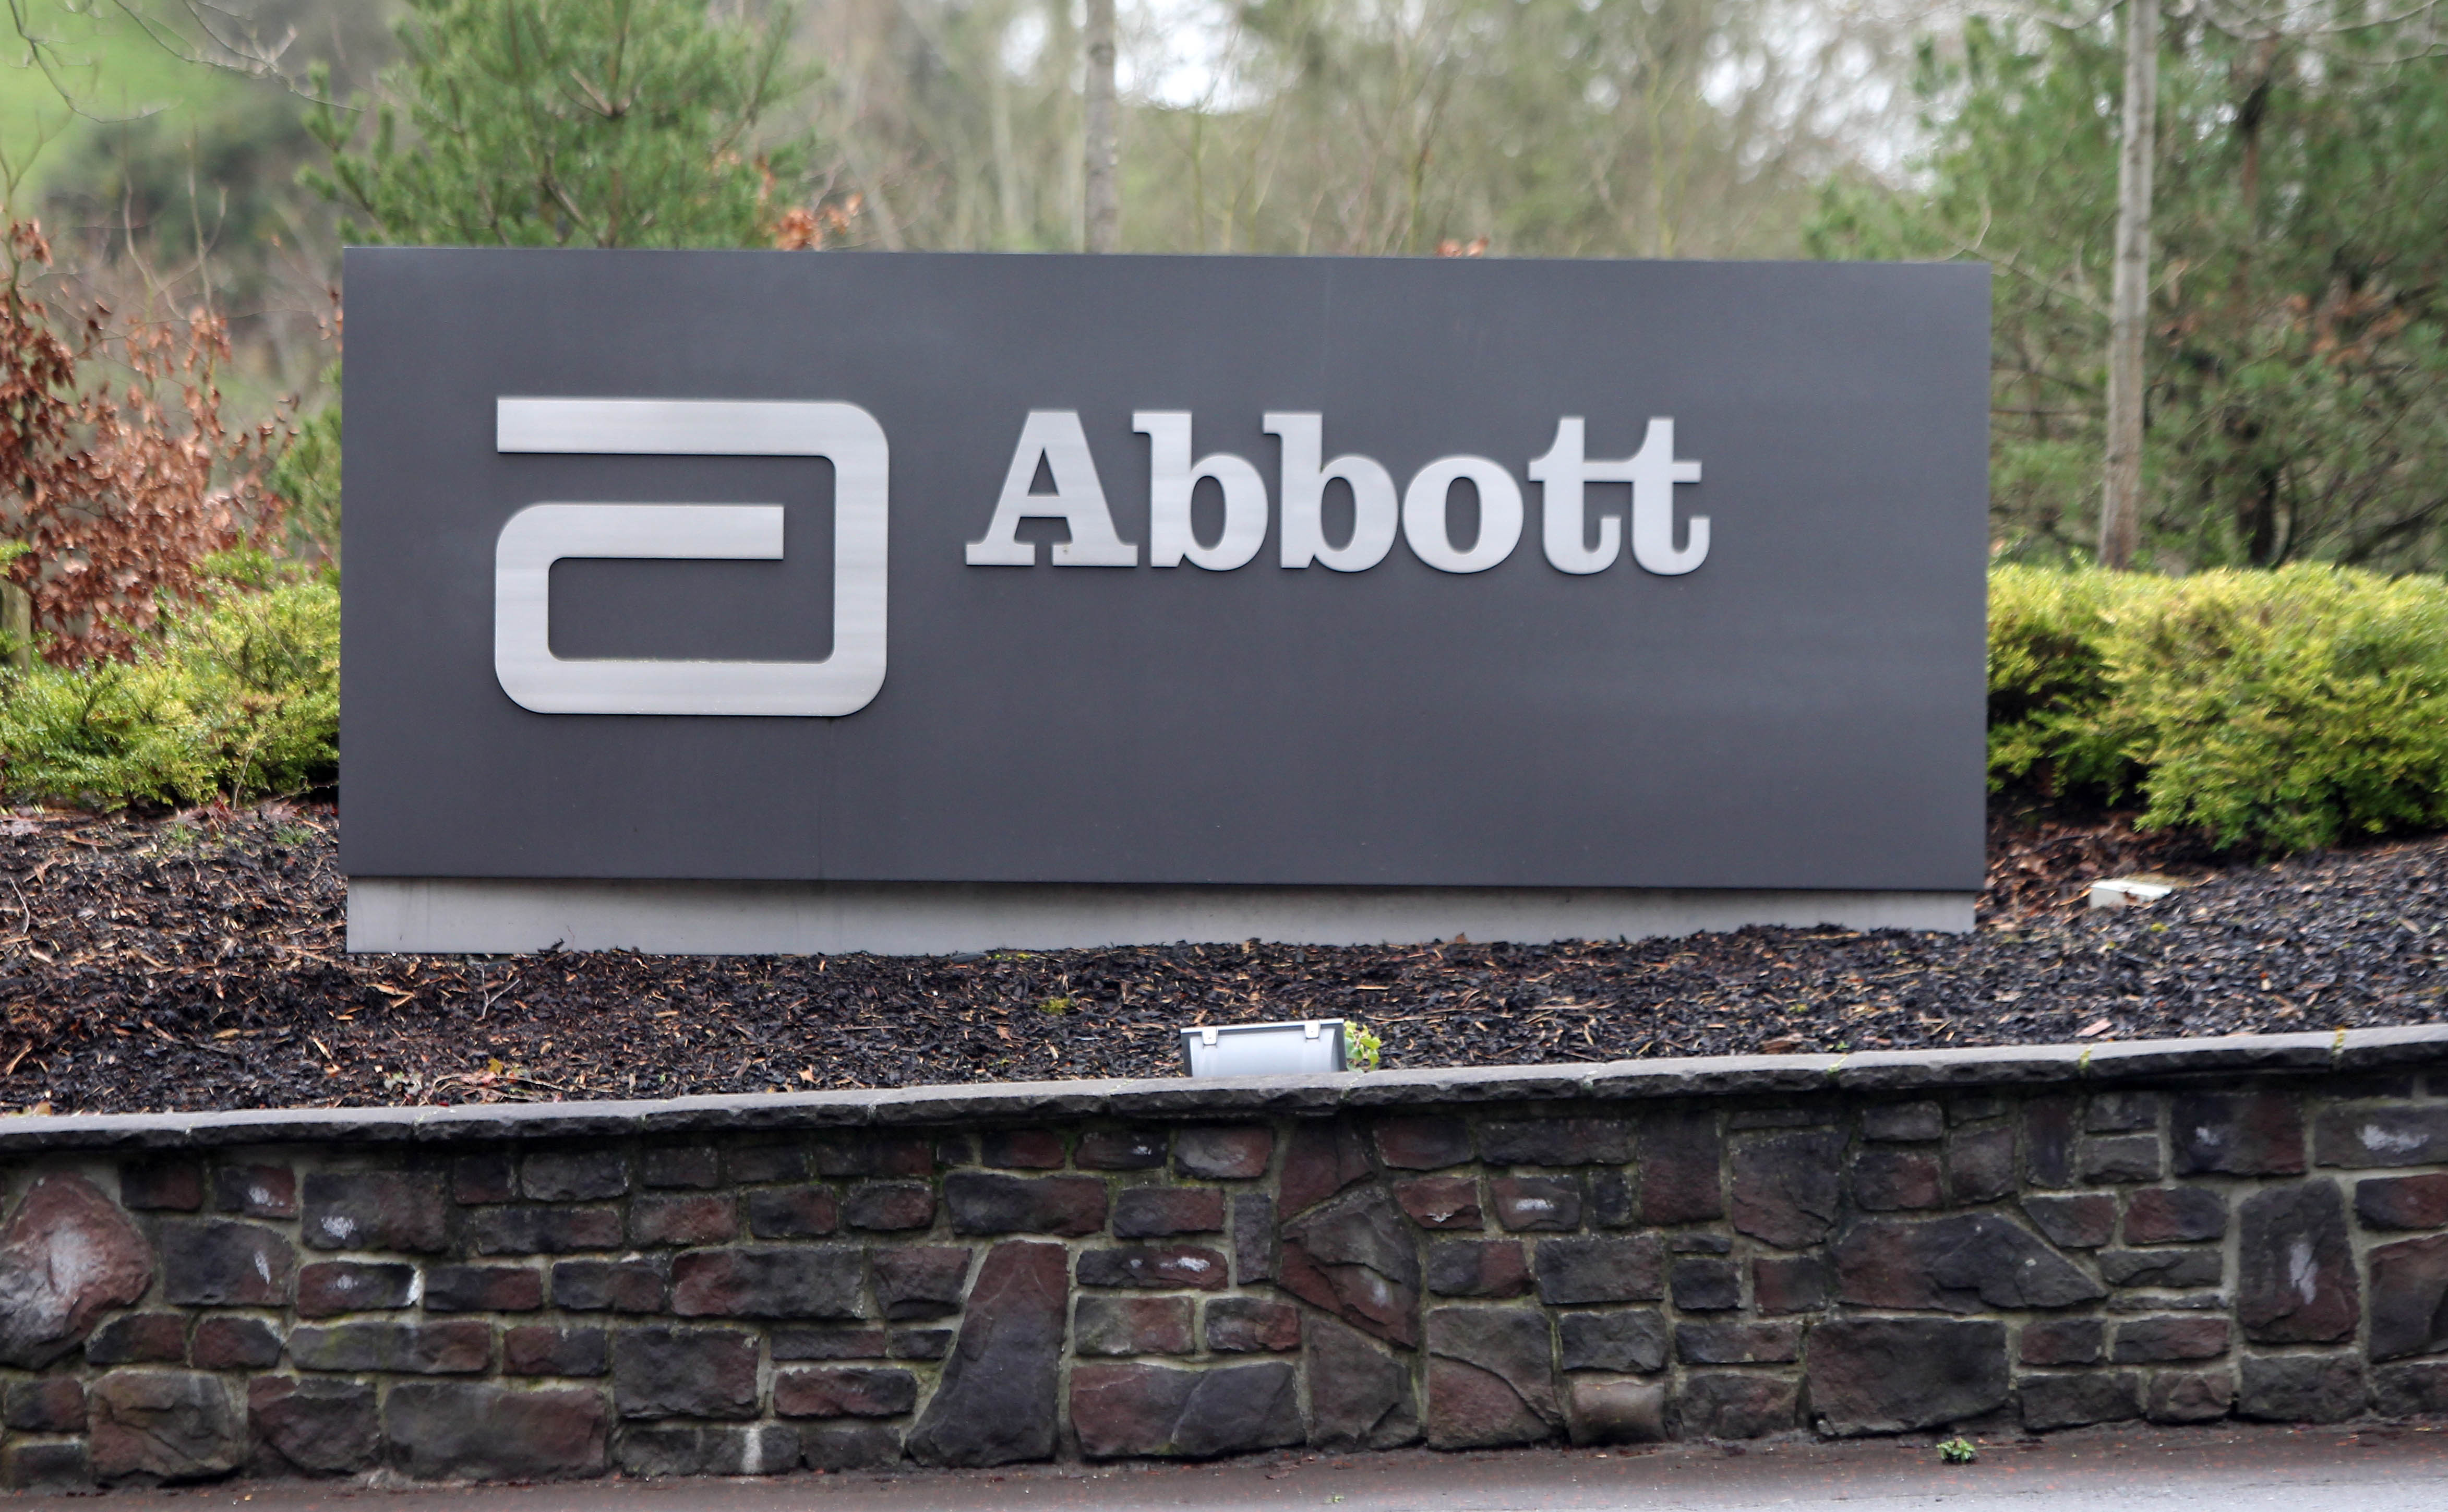 Parents Report Shortages Of Crucial Baby Formula After Abbott Nutrition Recall – CBS Detroit